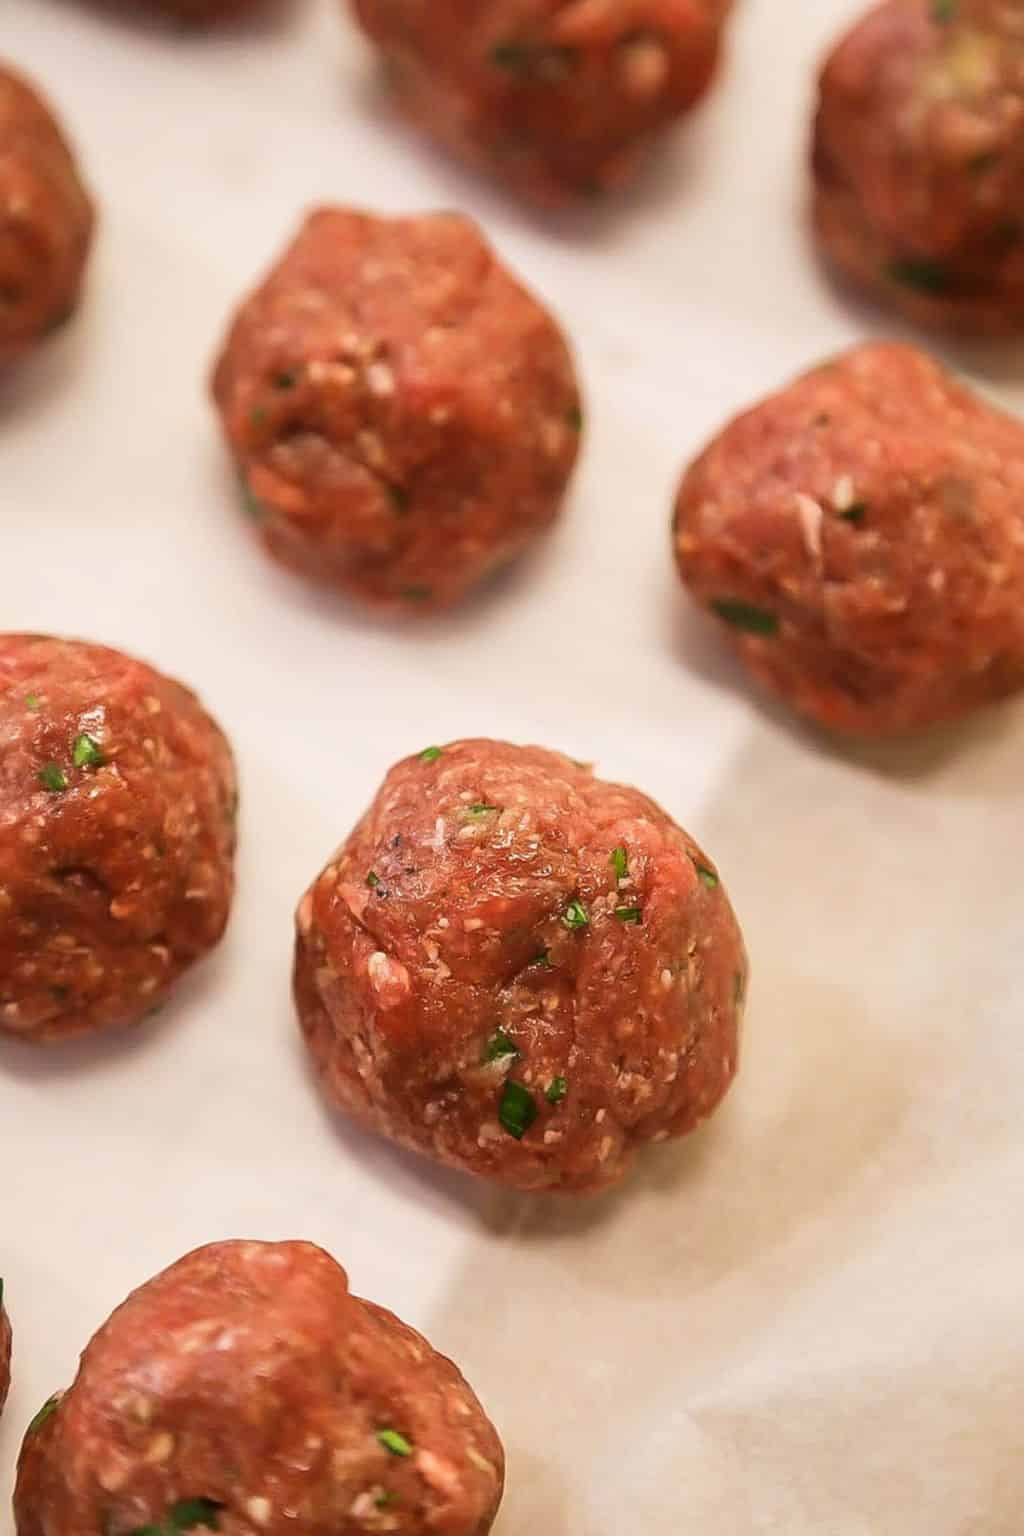 How To Make Meatballs Without Breadcrumbs Gluten Free Chef Tariq,Black Rose Meaning In Love